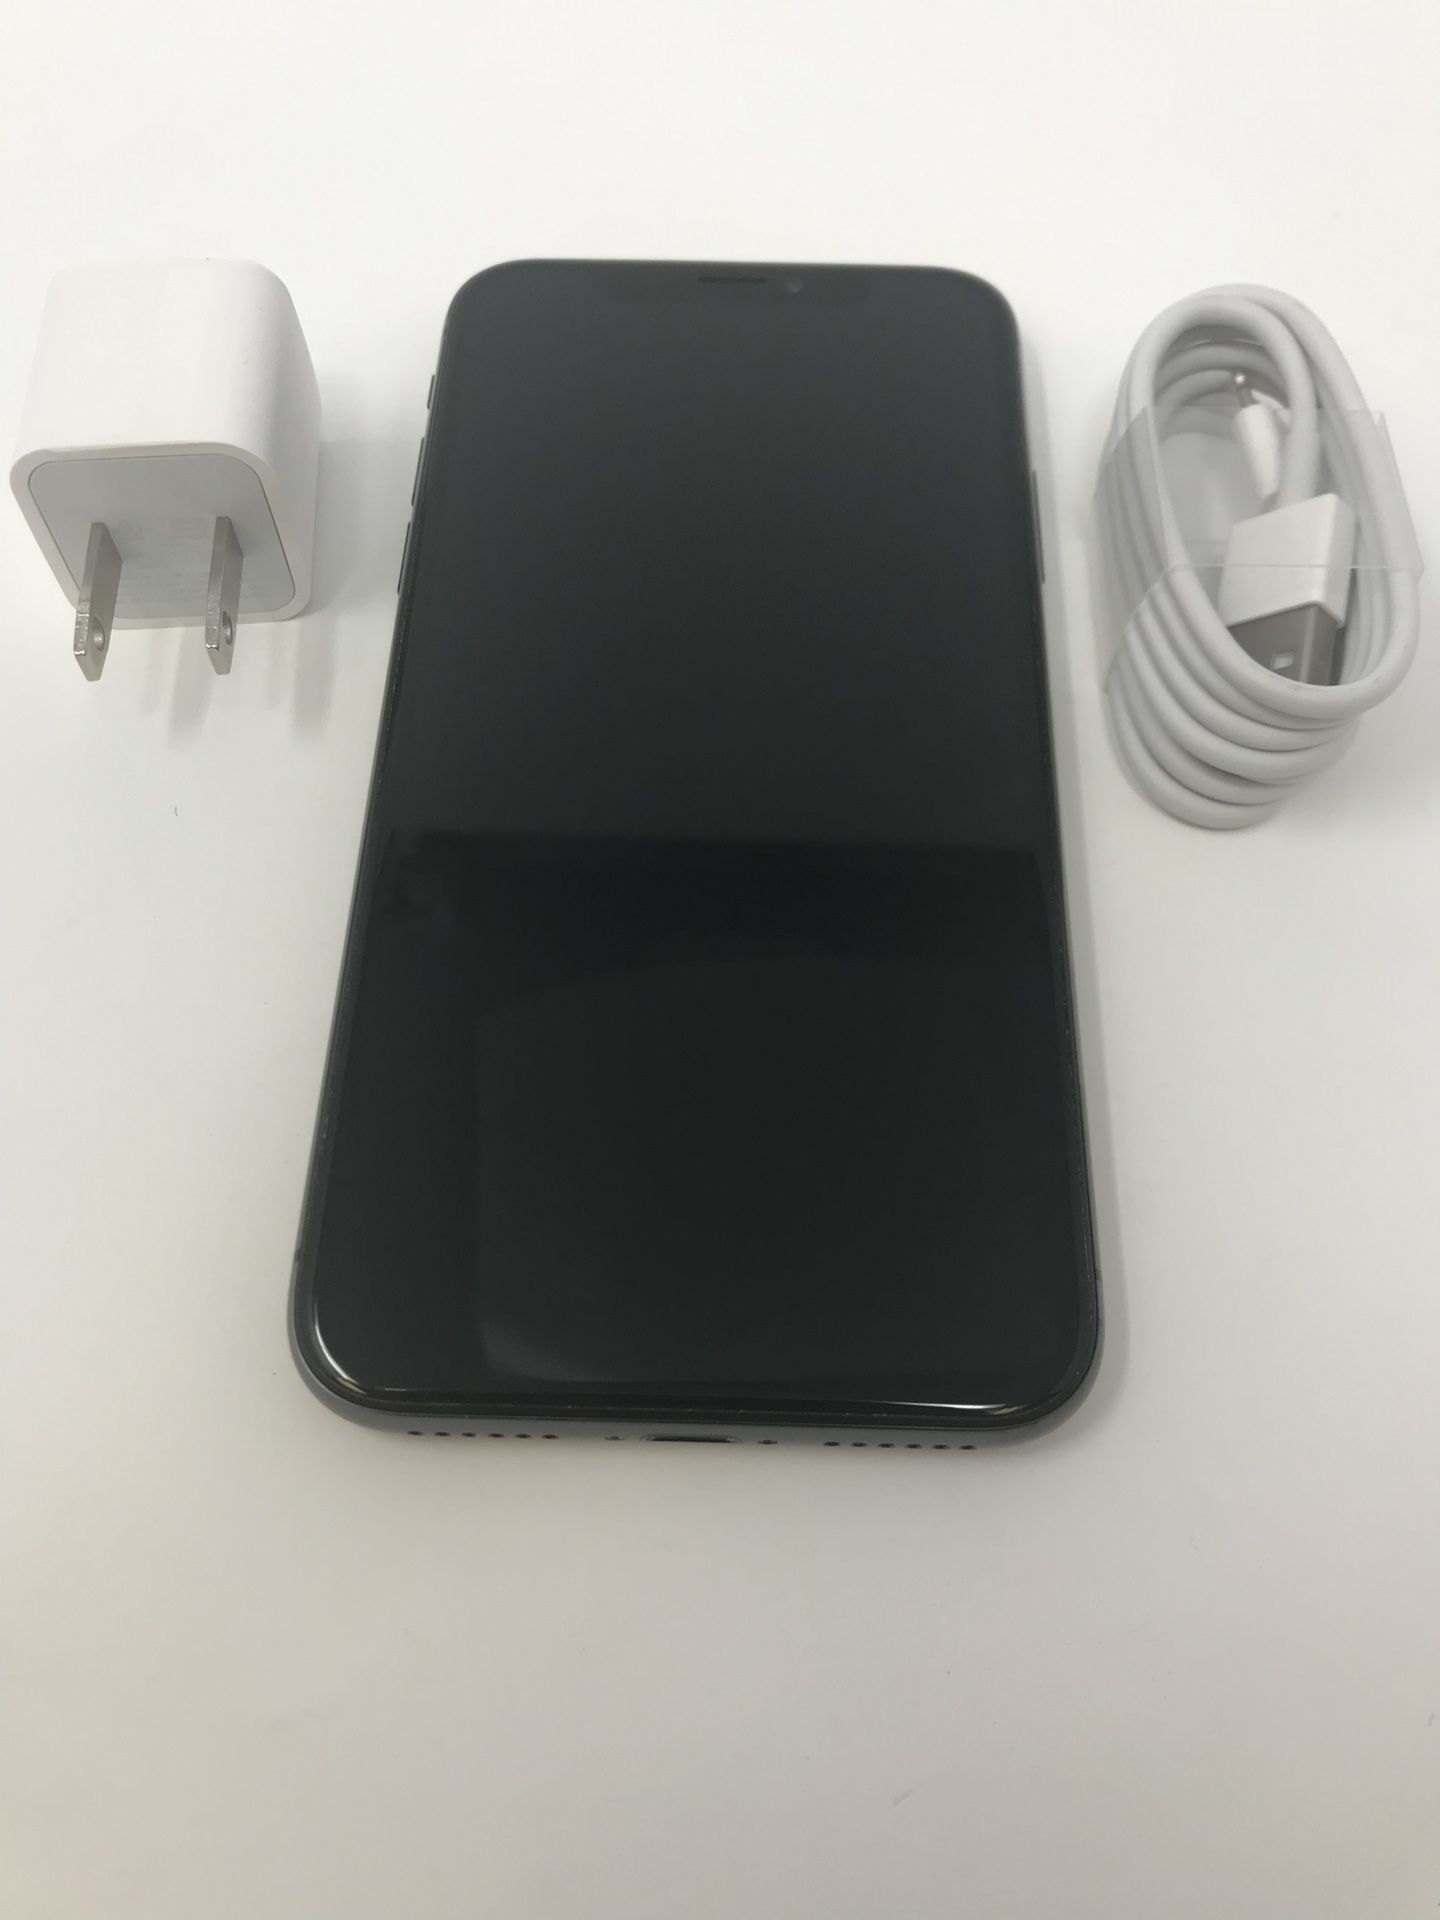 iPhone X 64GB Space Gray Unlocked 90 Day Warranty, Excellent Condition. From lease to own